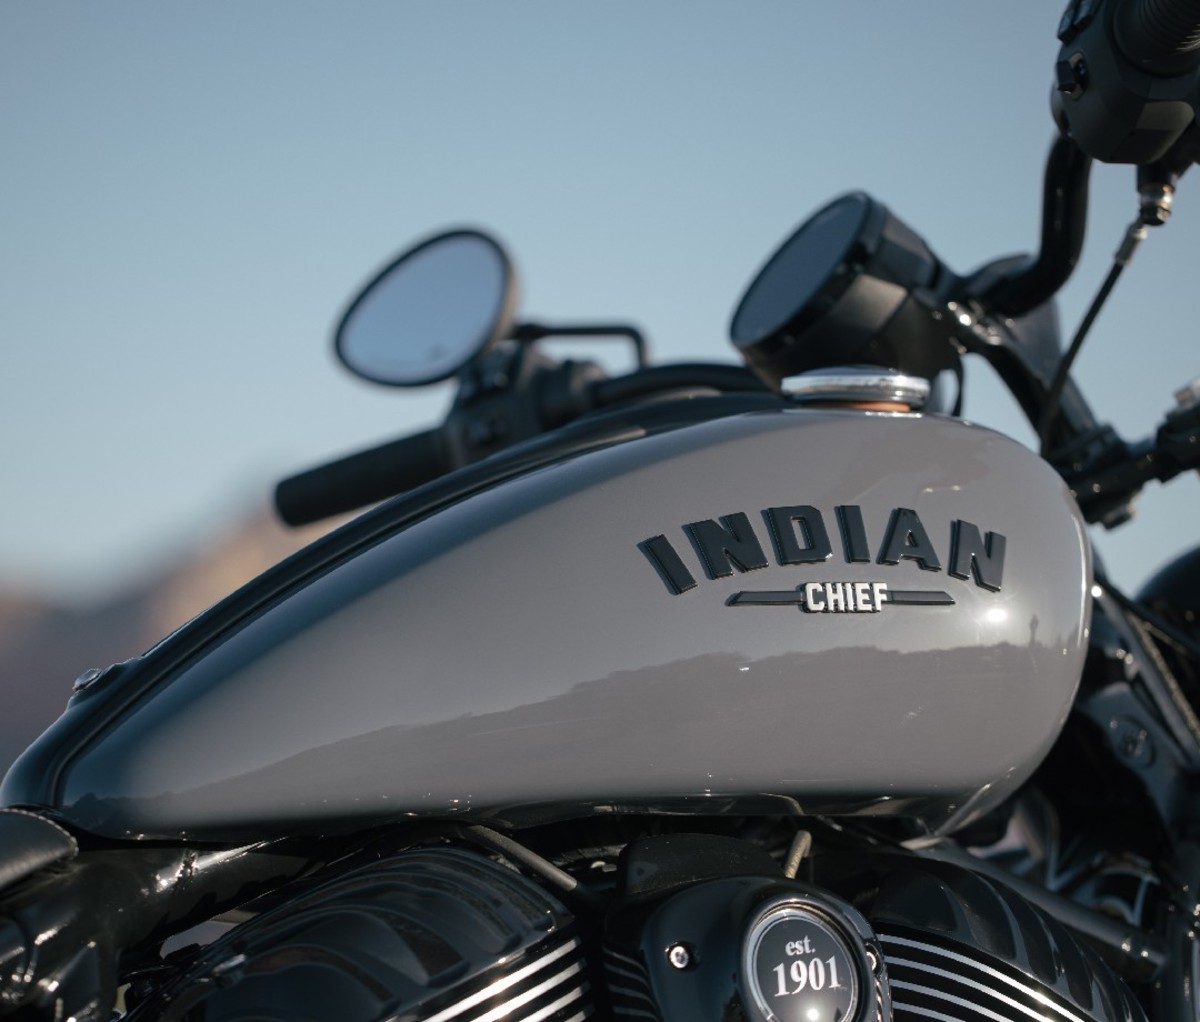 Side profile of Indian Chief Motorcycle gas tank with black lettered "Indian" logo on a gray tank